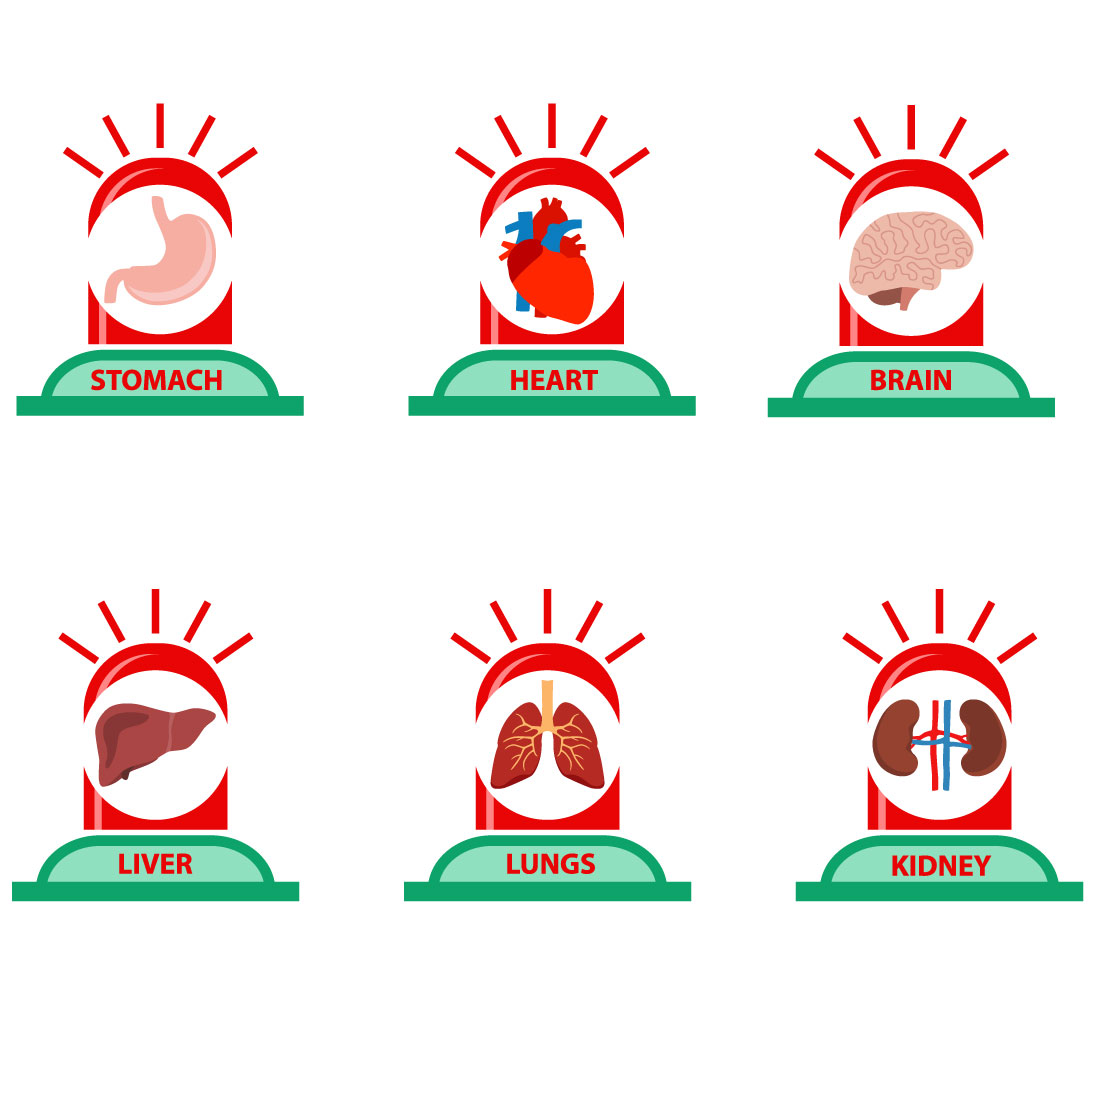 Medical Emergency Icons Design cover image.